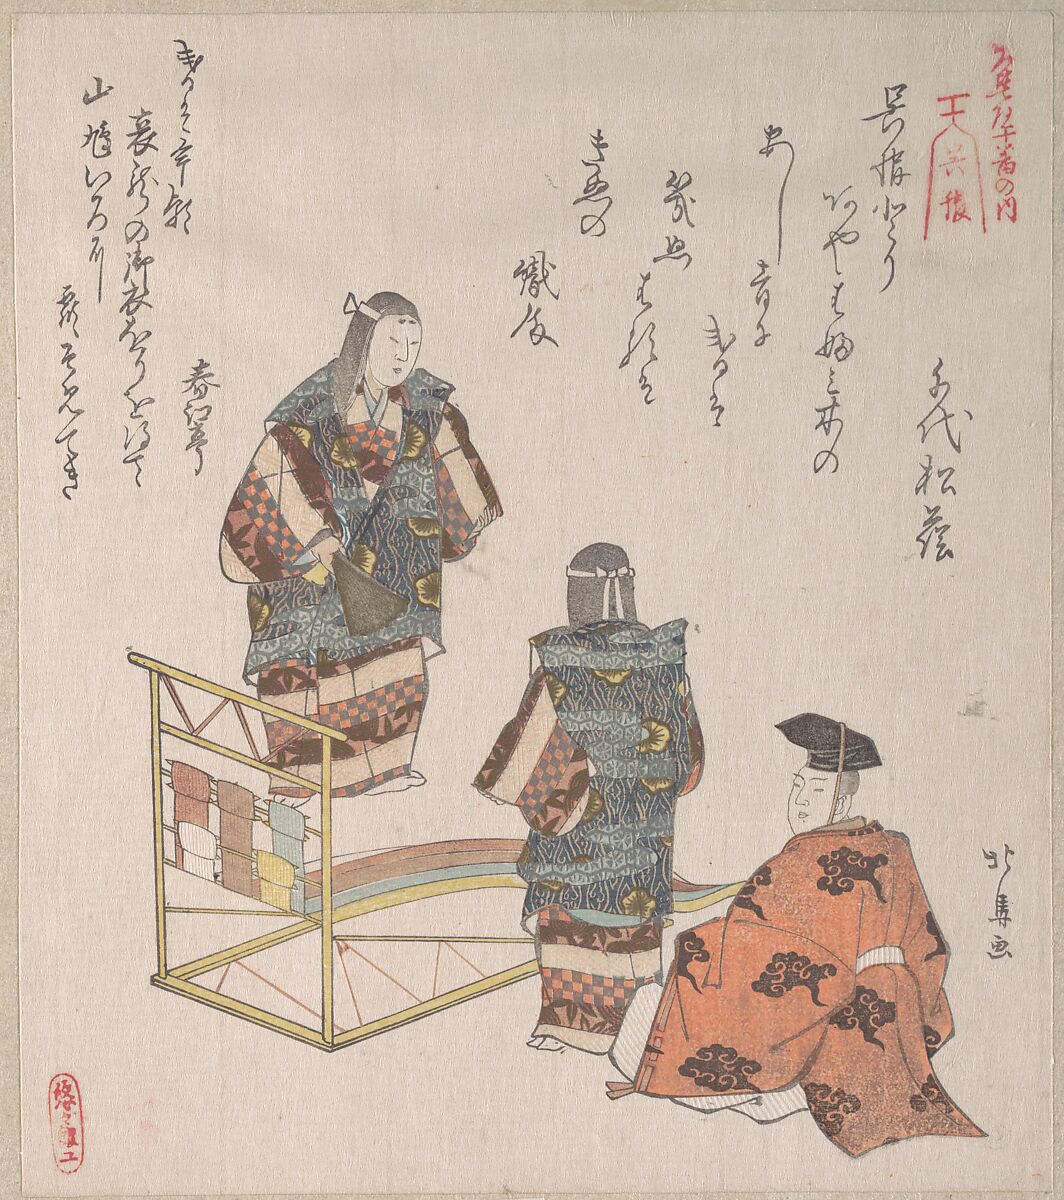 Scene from the Noh Dance "Kureha", Teisai Hokuba (Japanese, 1771–1844), Part of an album of woodblock prints (surimono); ink and color on paper, Japan 